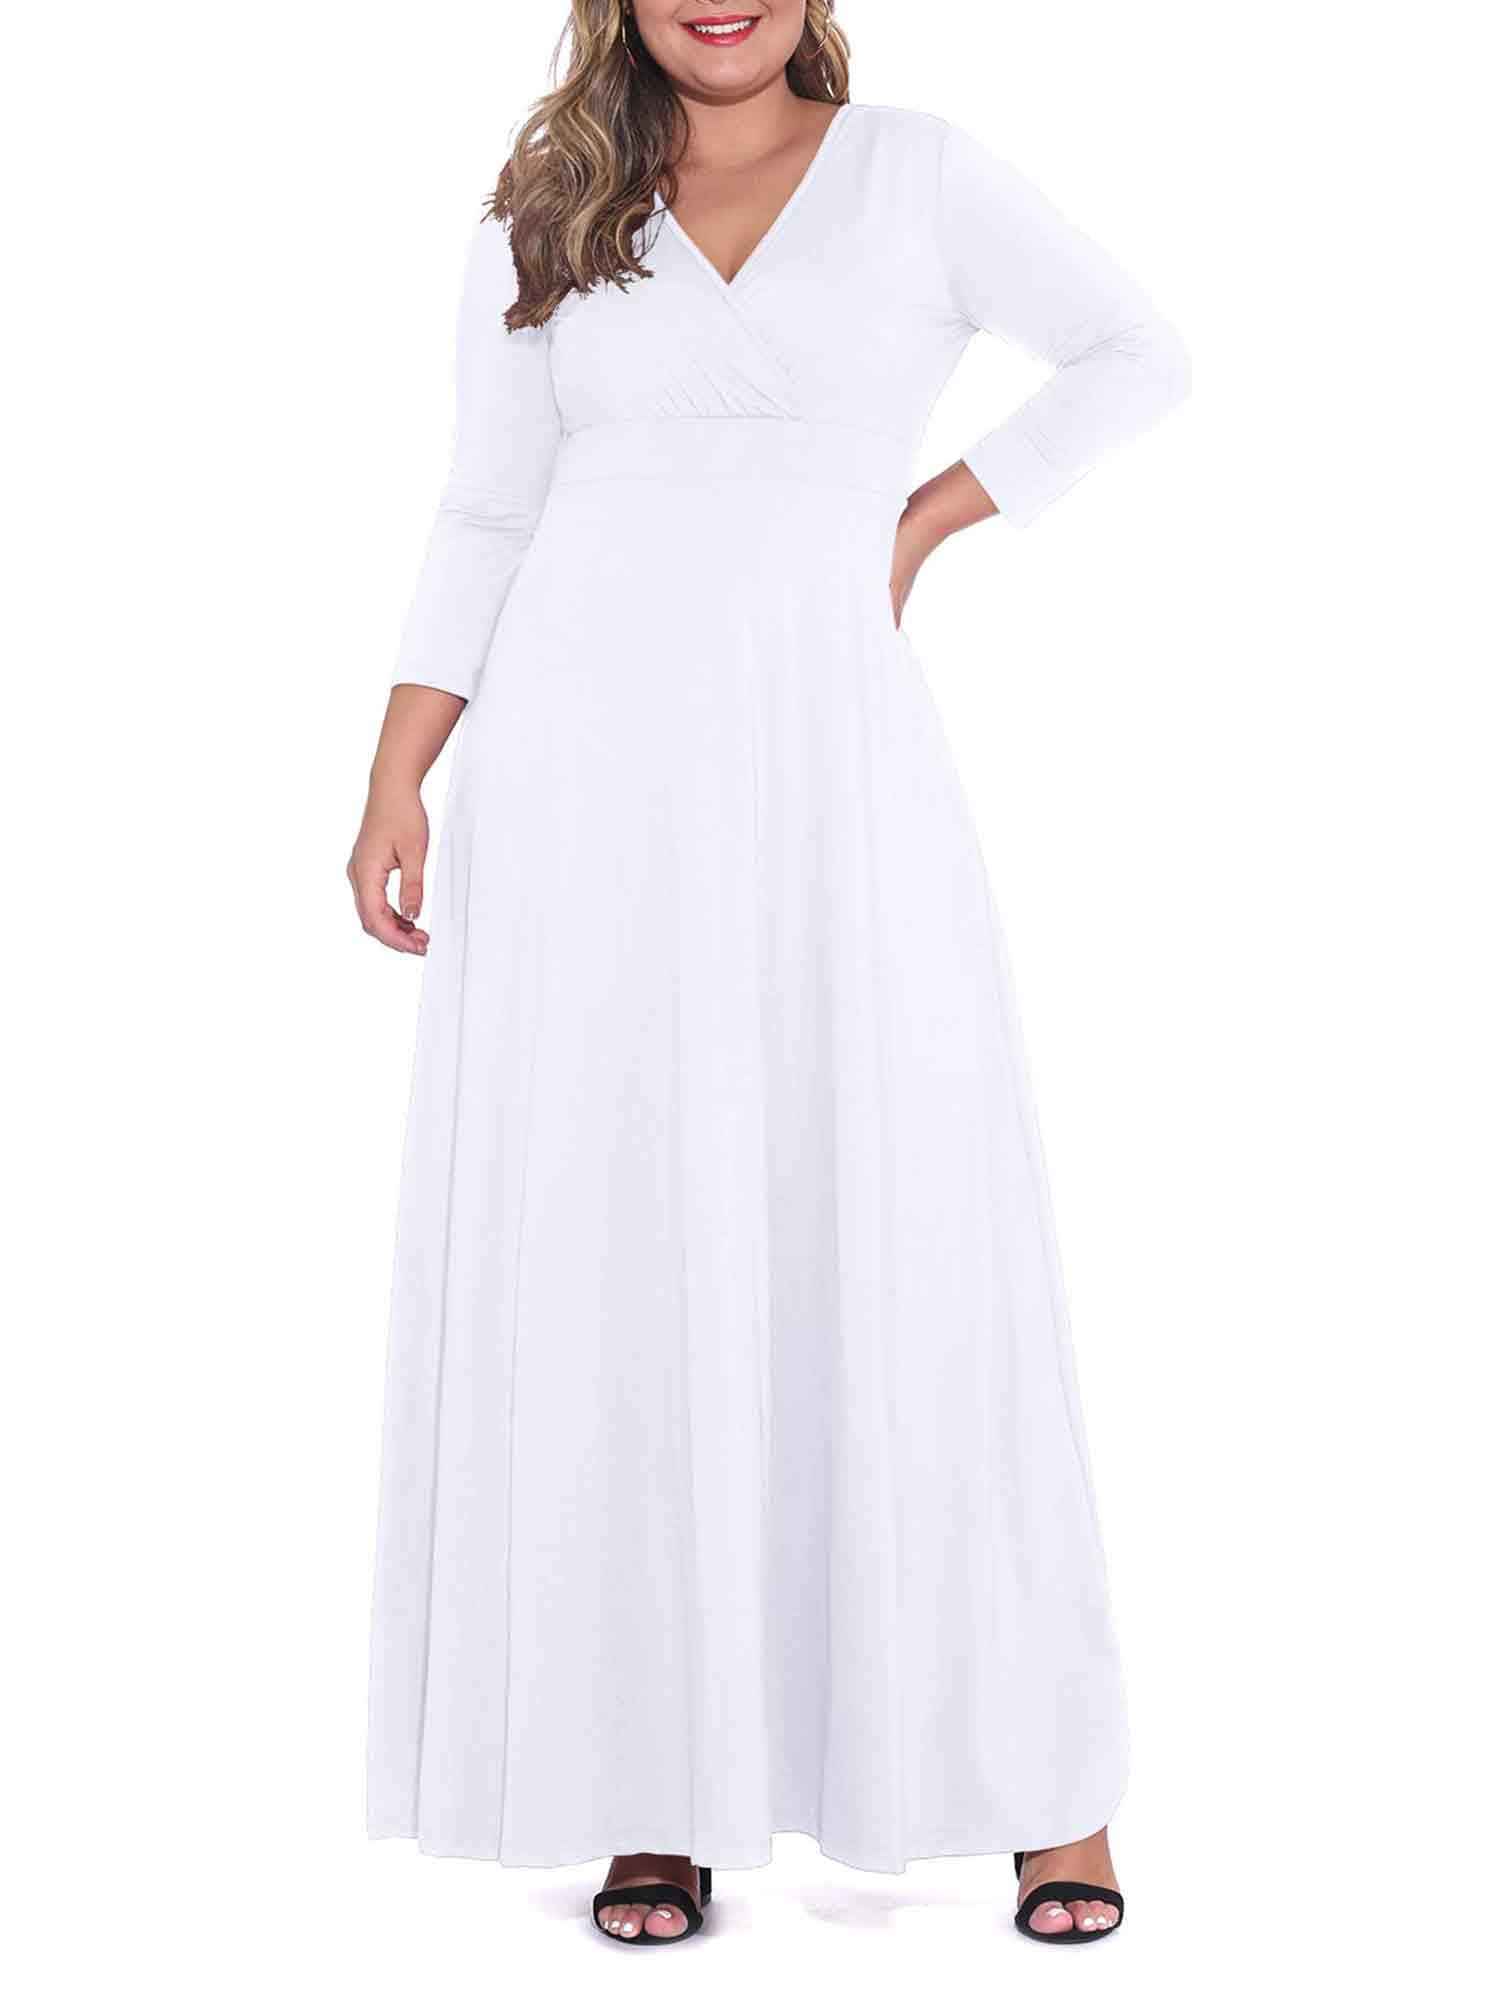 POSESHE Plus Size Women's Solid 3/4 Sleeve Evening Gown, Flowy V-Neck ...